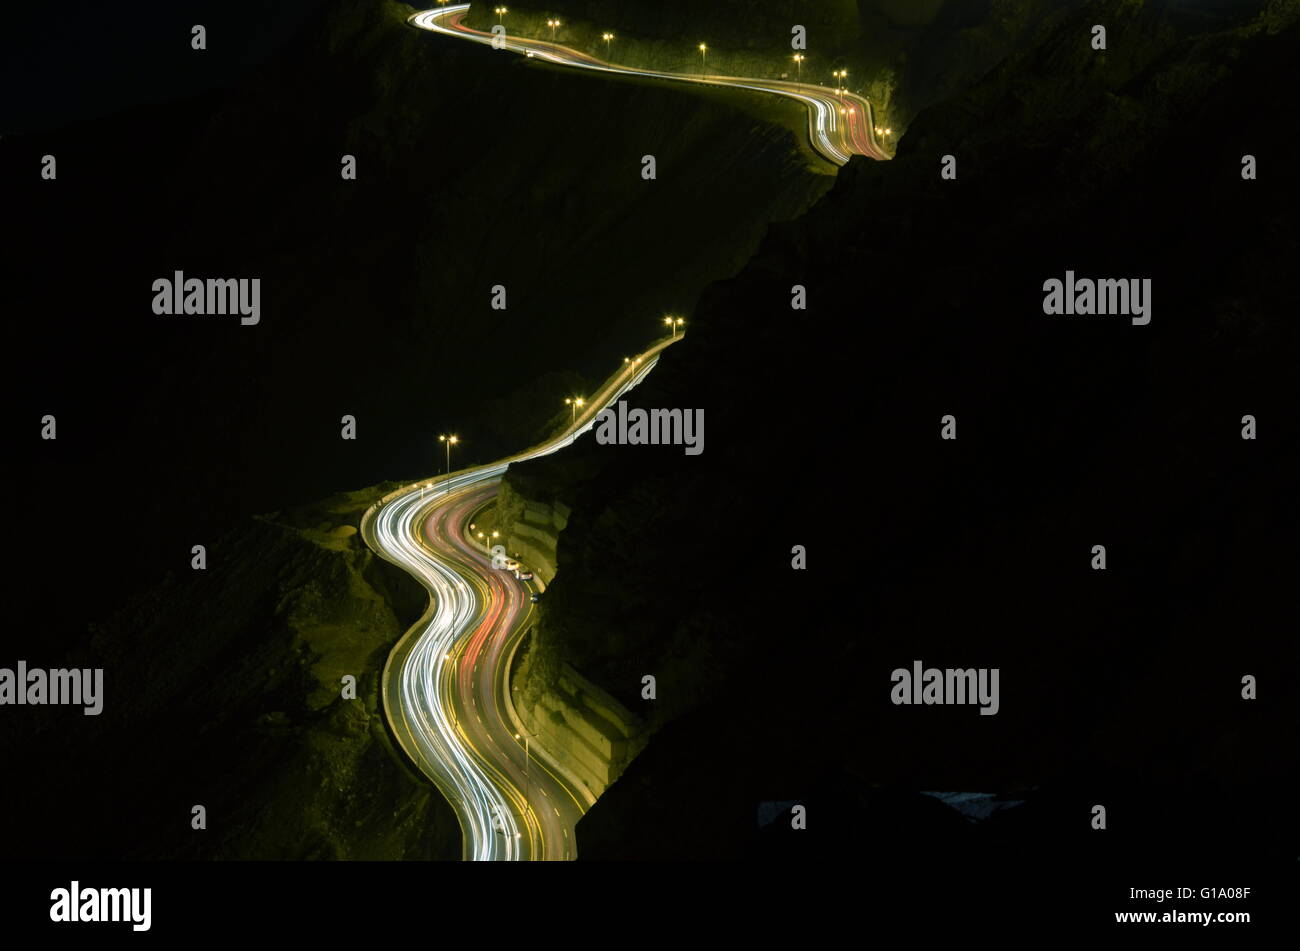 Slide Hilly Light, Photo taken on the on of the cliff of Al Hada Hill Road, Al Hada Thaif, Saudi Arabia, in the night time with Stock Photo